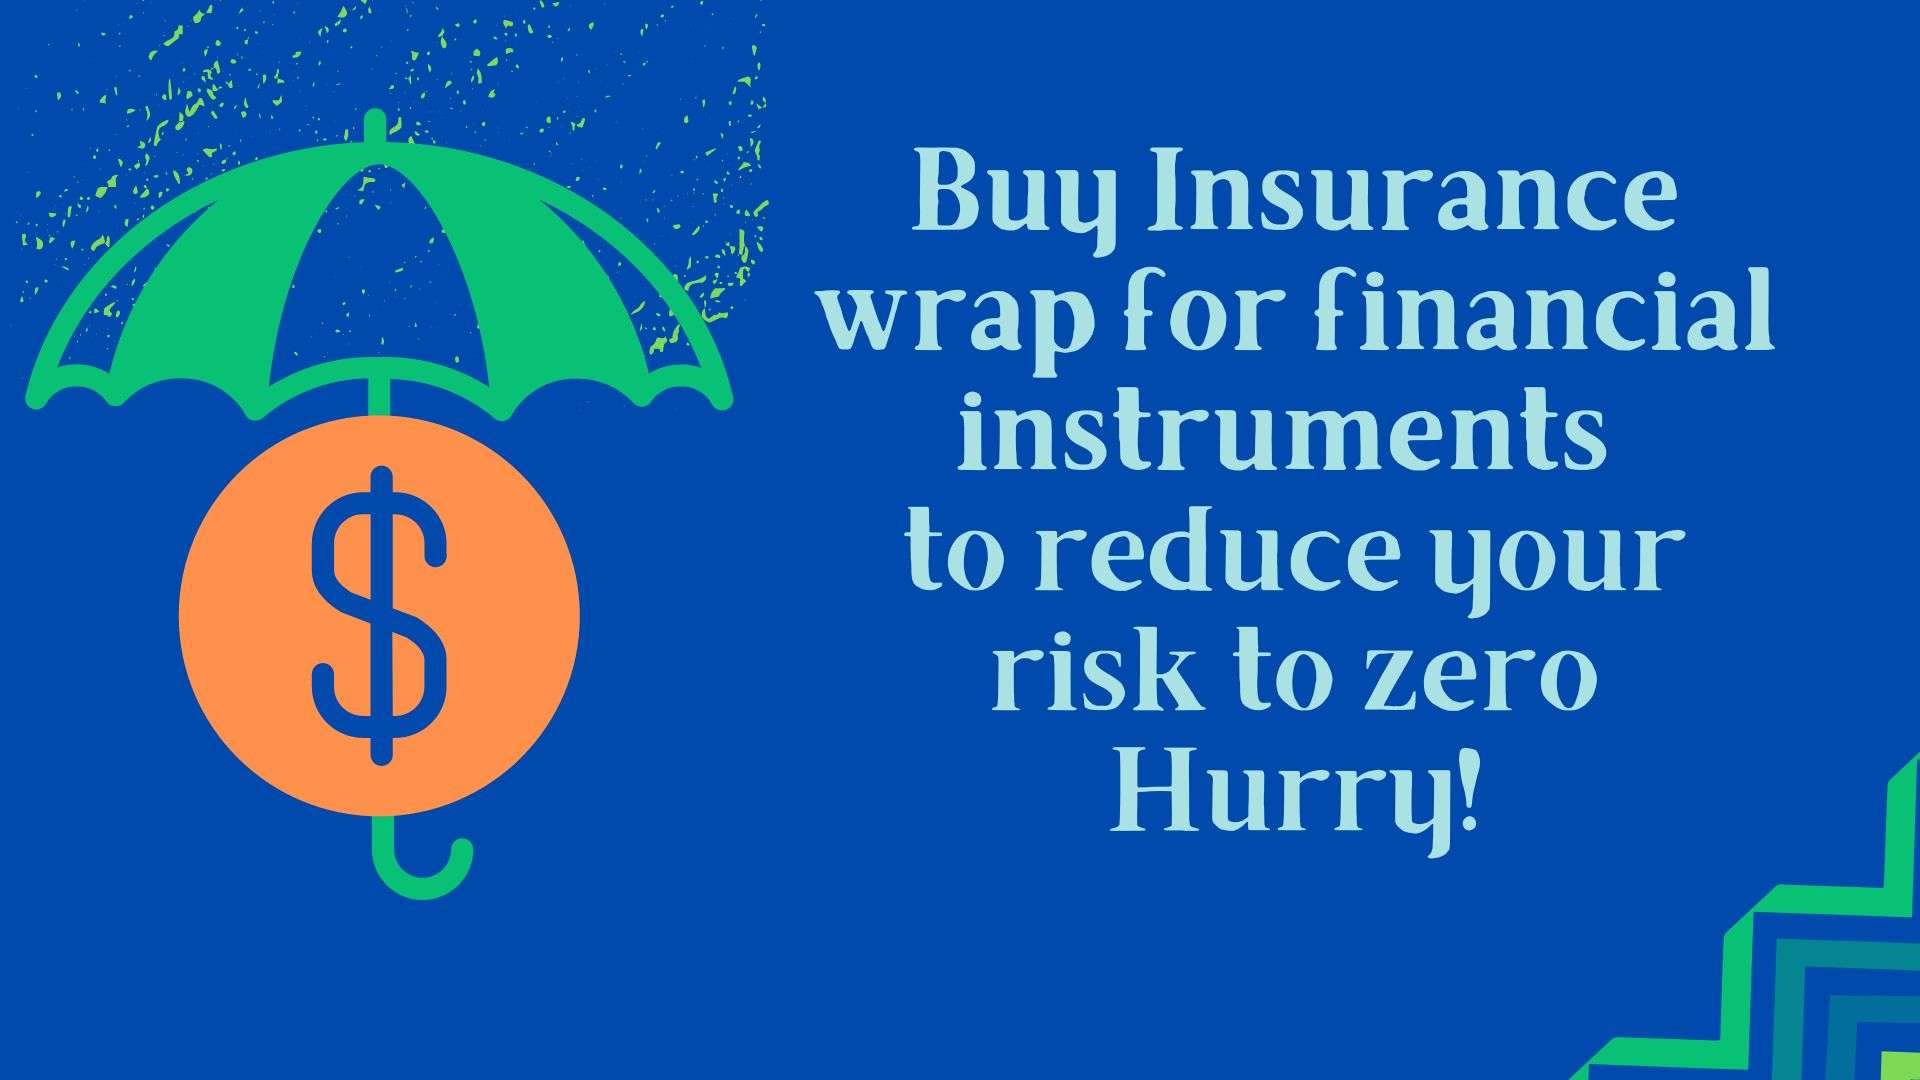 Insurance wrap for financial instruments